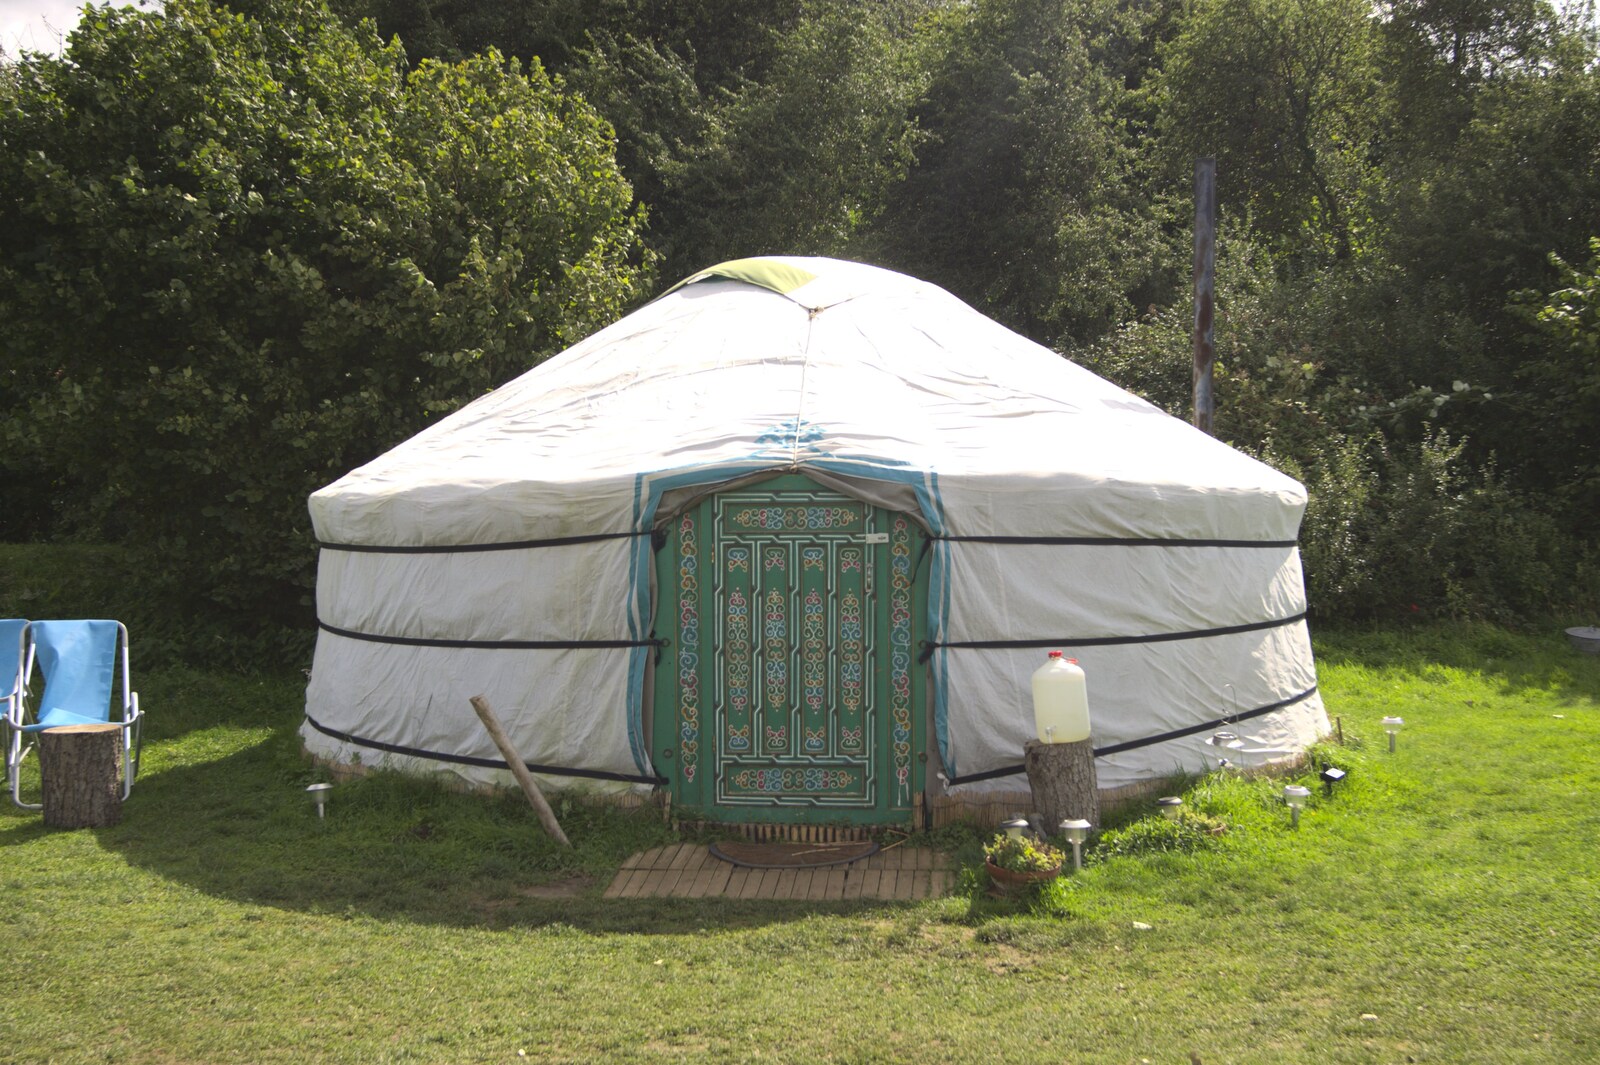 Camping with Trains, Yaxham, Norfolk - 29th August 2010: A funky Yurt